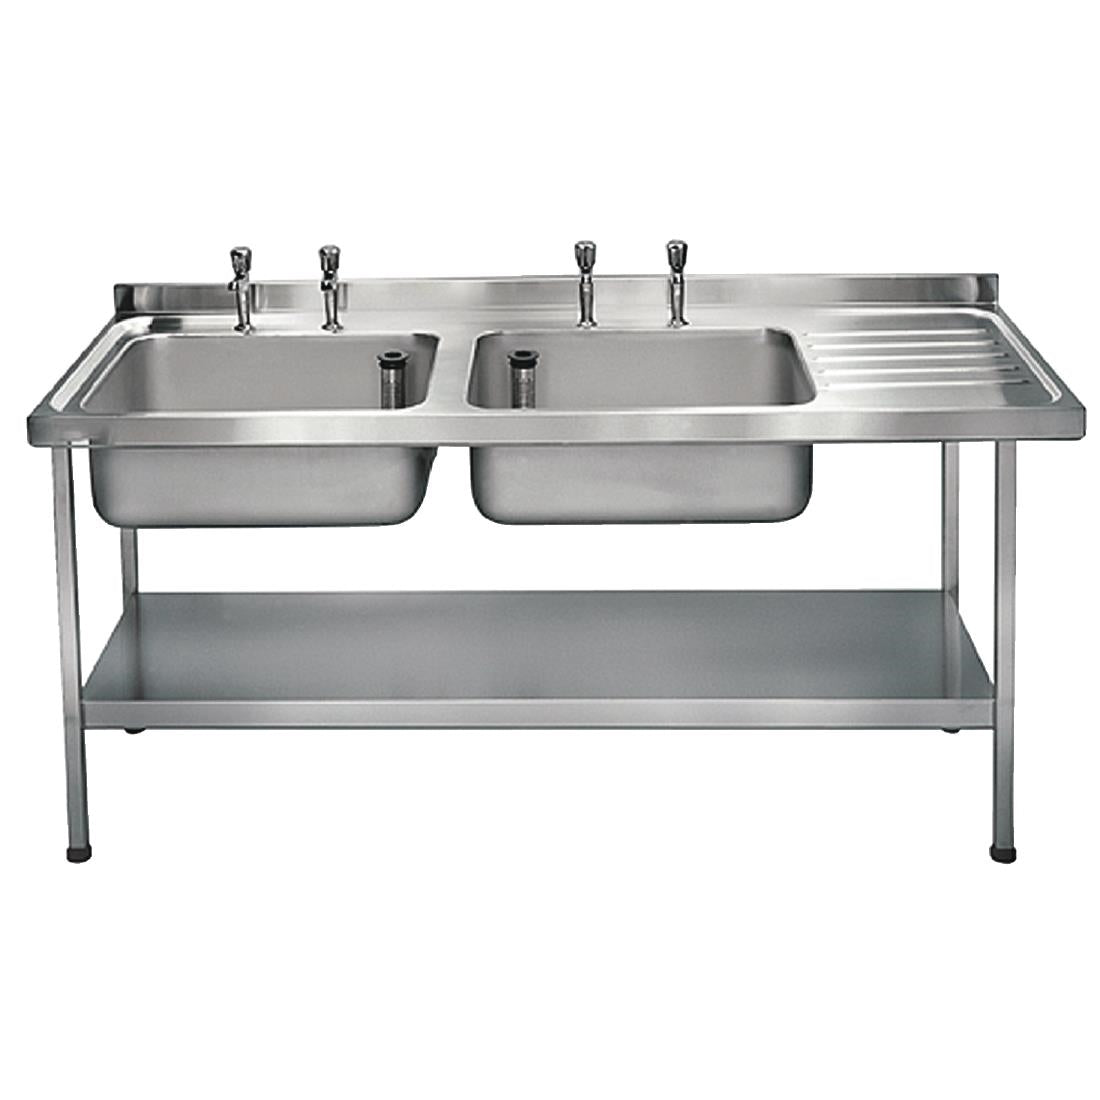 Franke Sissons Stainless Steel Double Sink Right Hand Drainer 1800x650mm JD Catering Equipment Solutions Ltd